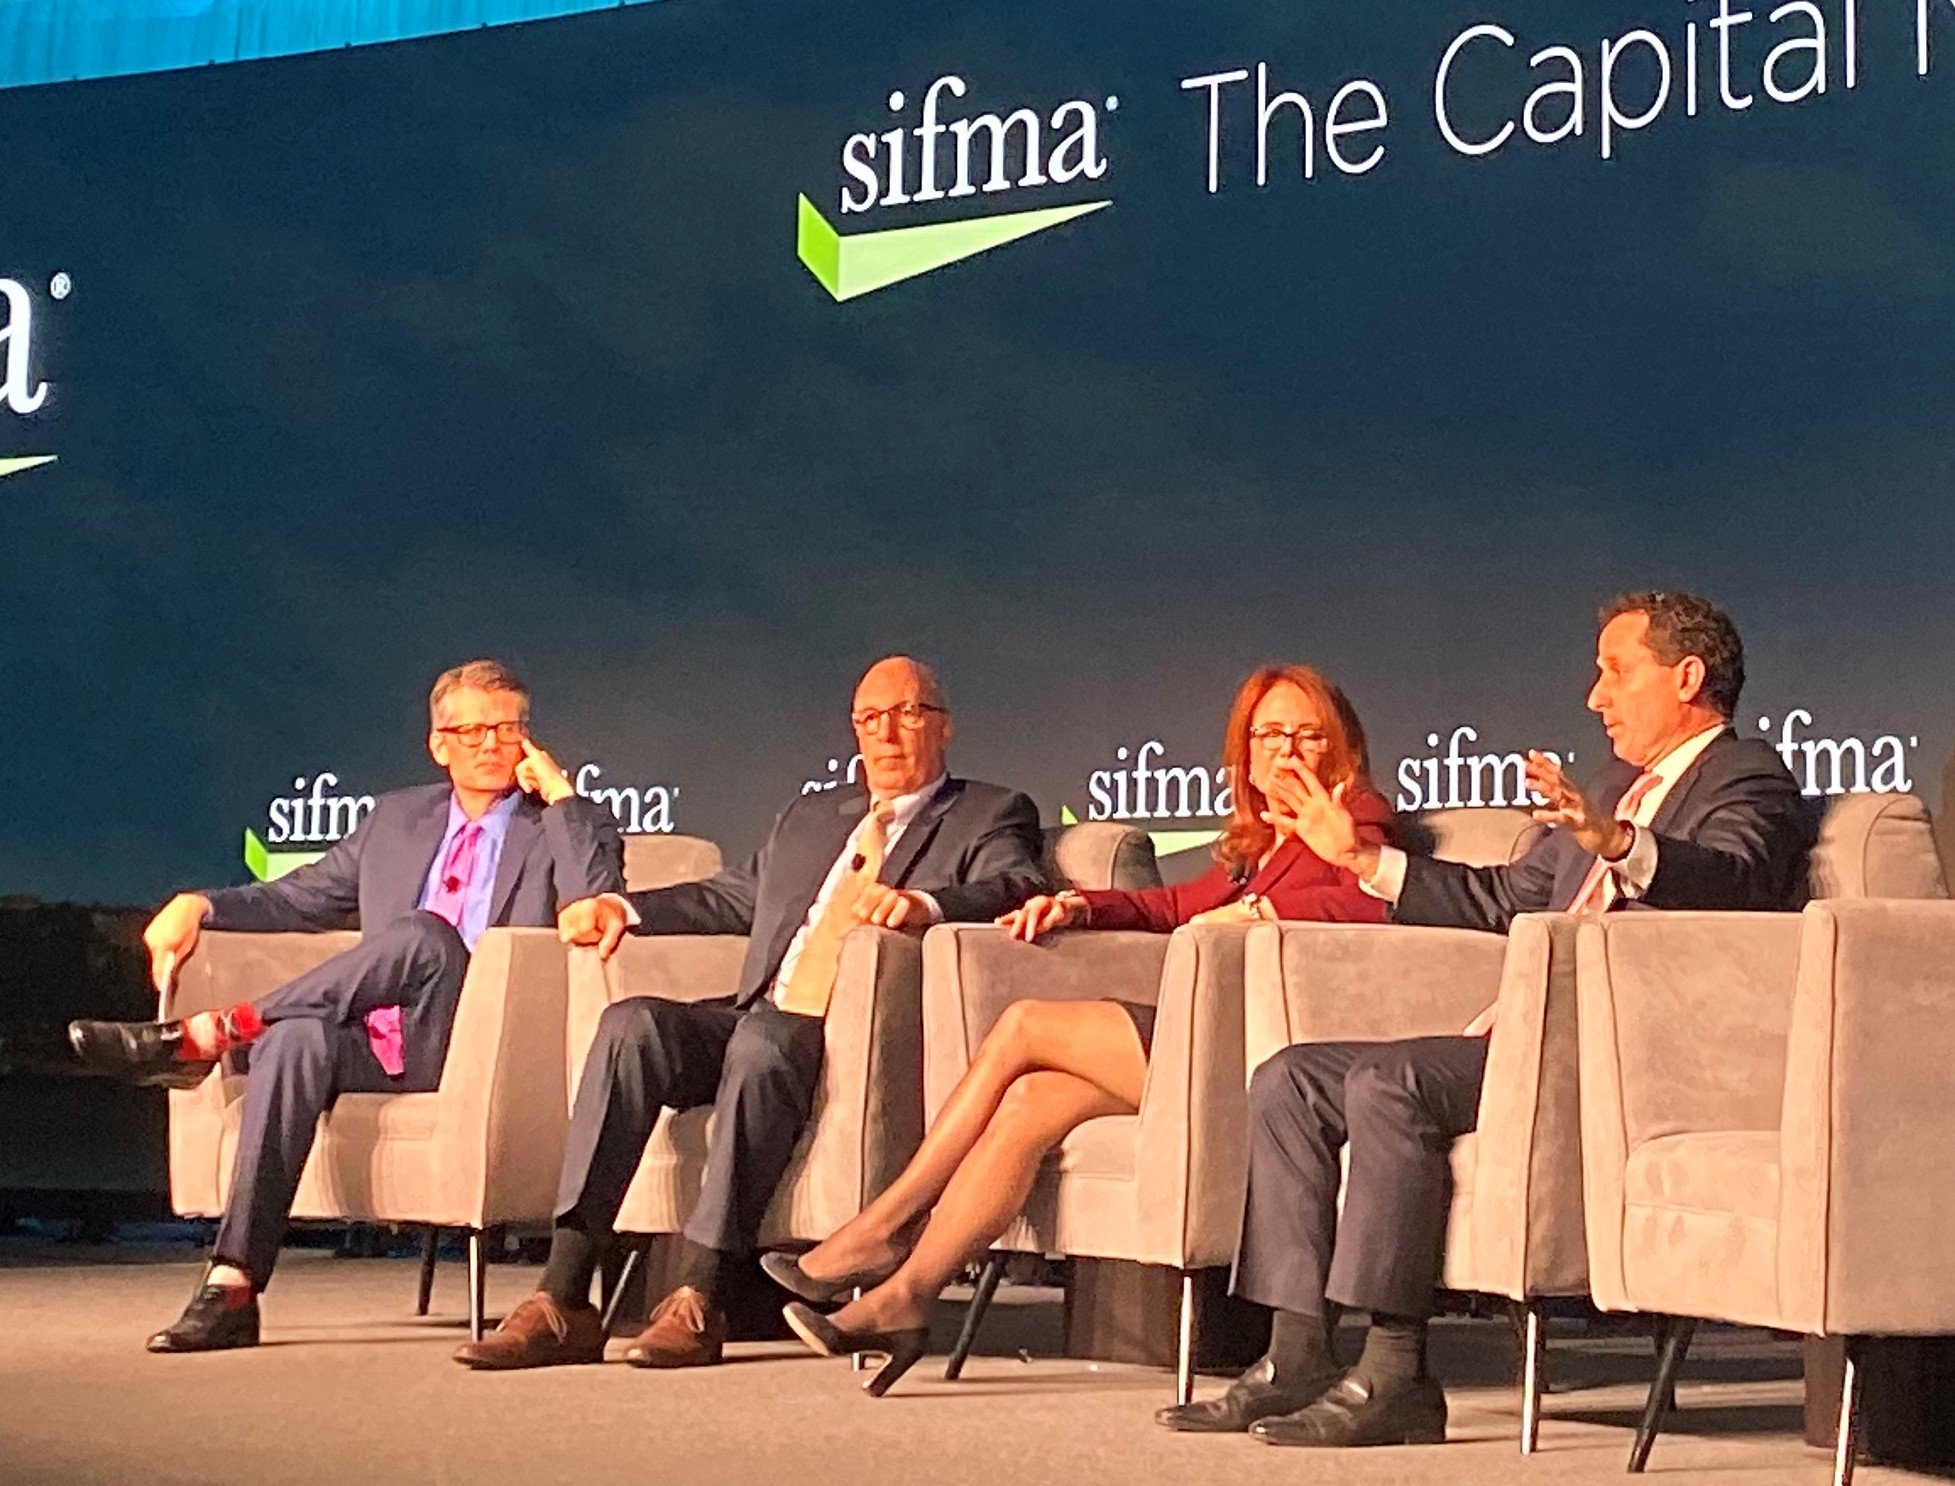 FidelityNews on Twitter "Our Mike Durbin spoke on a panel with